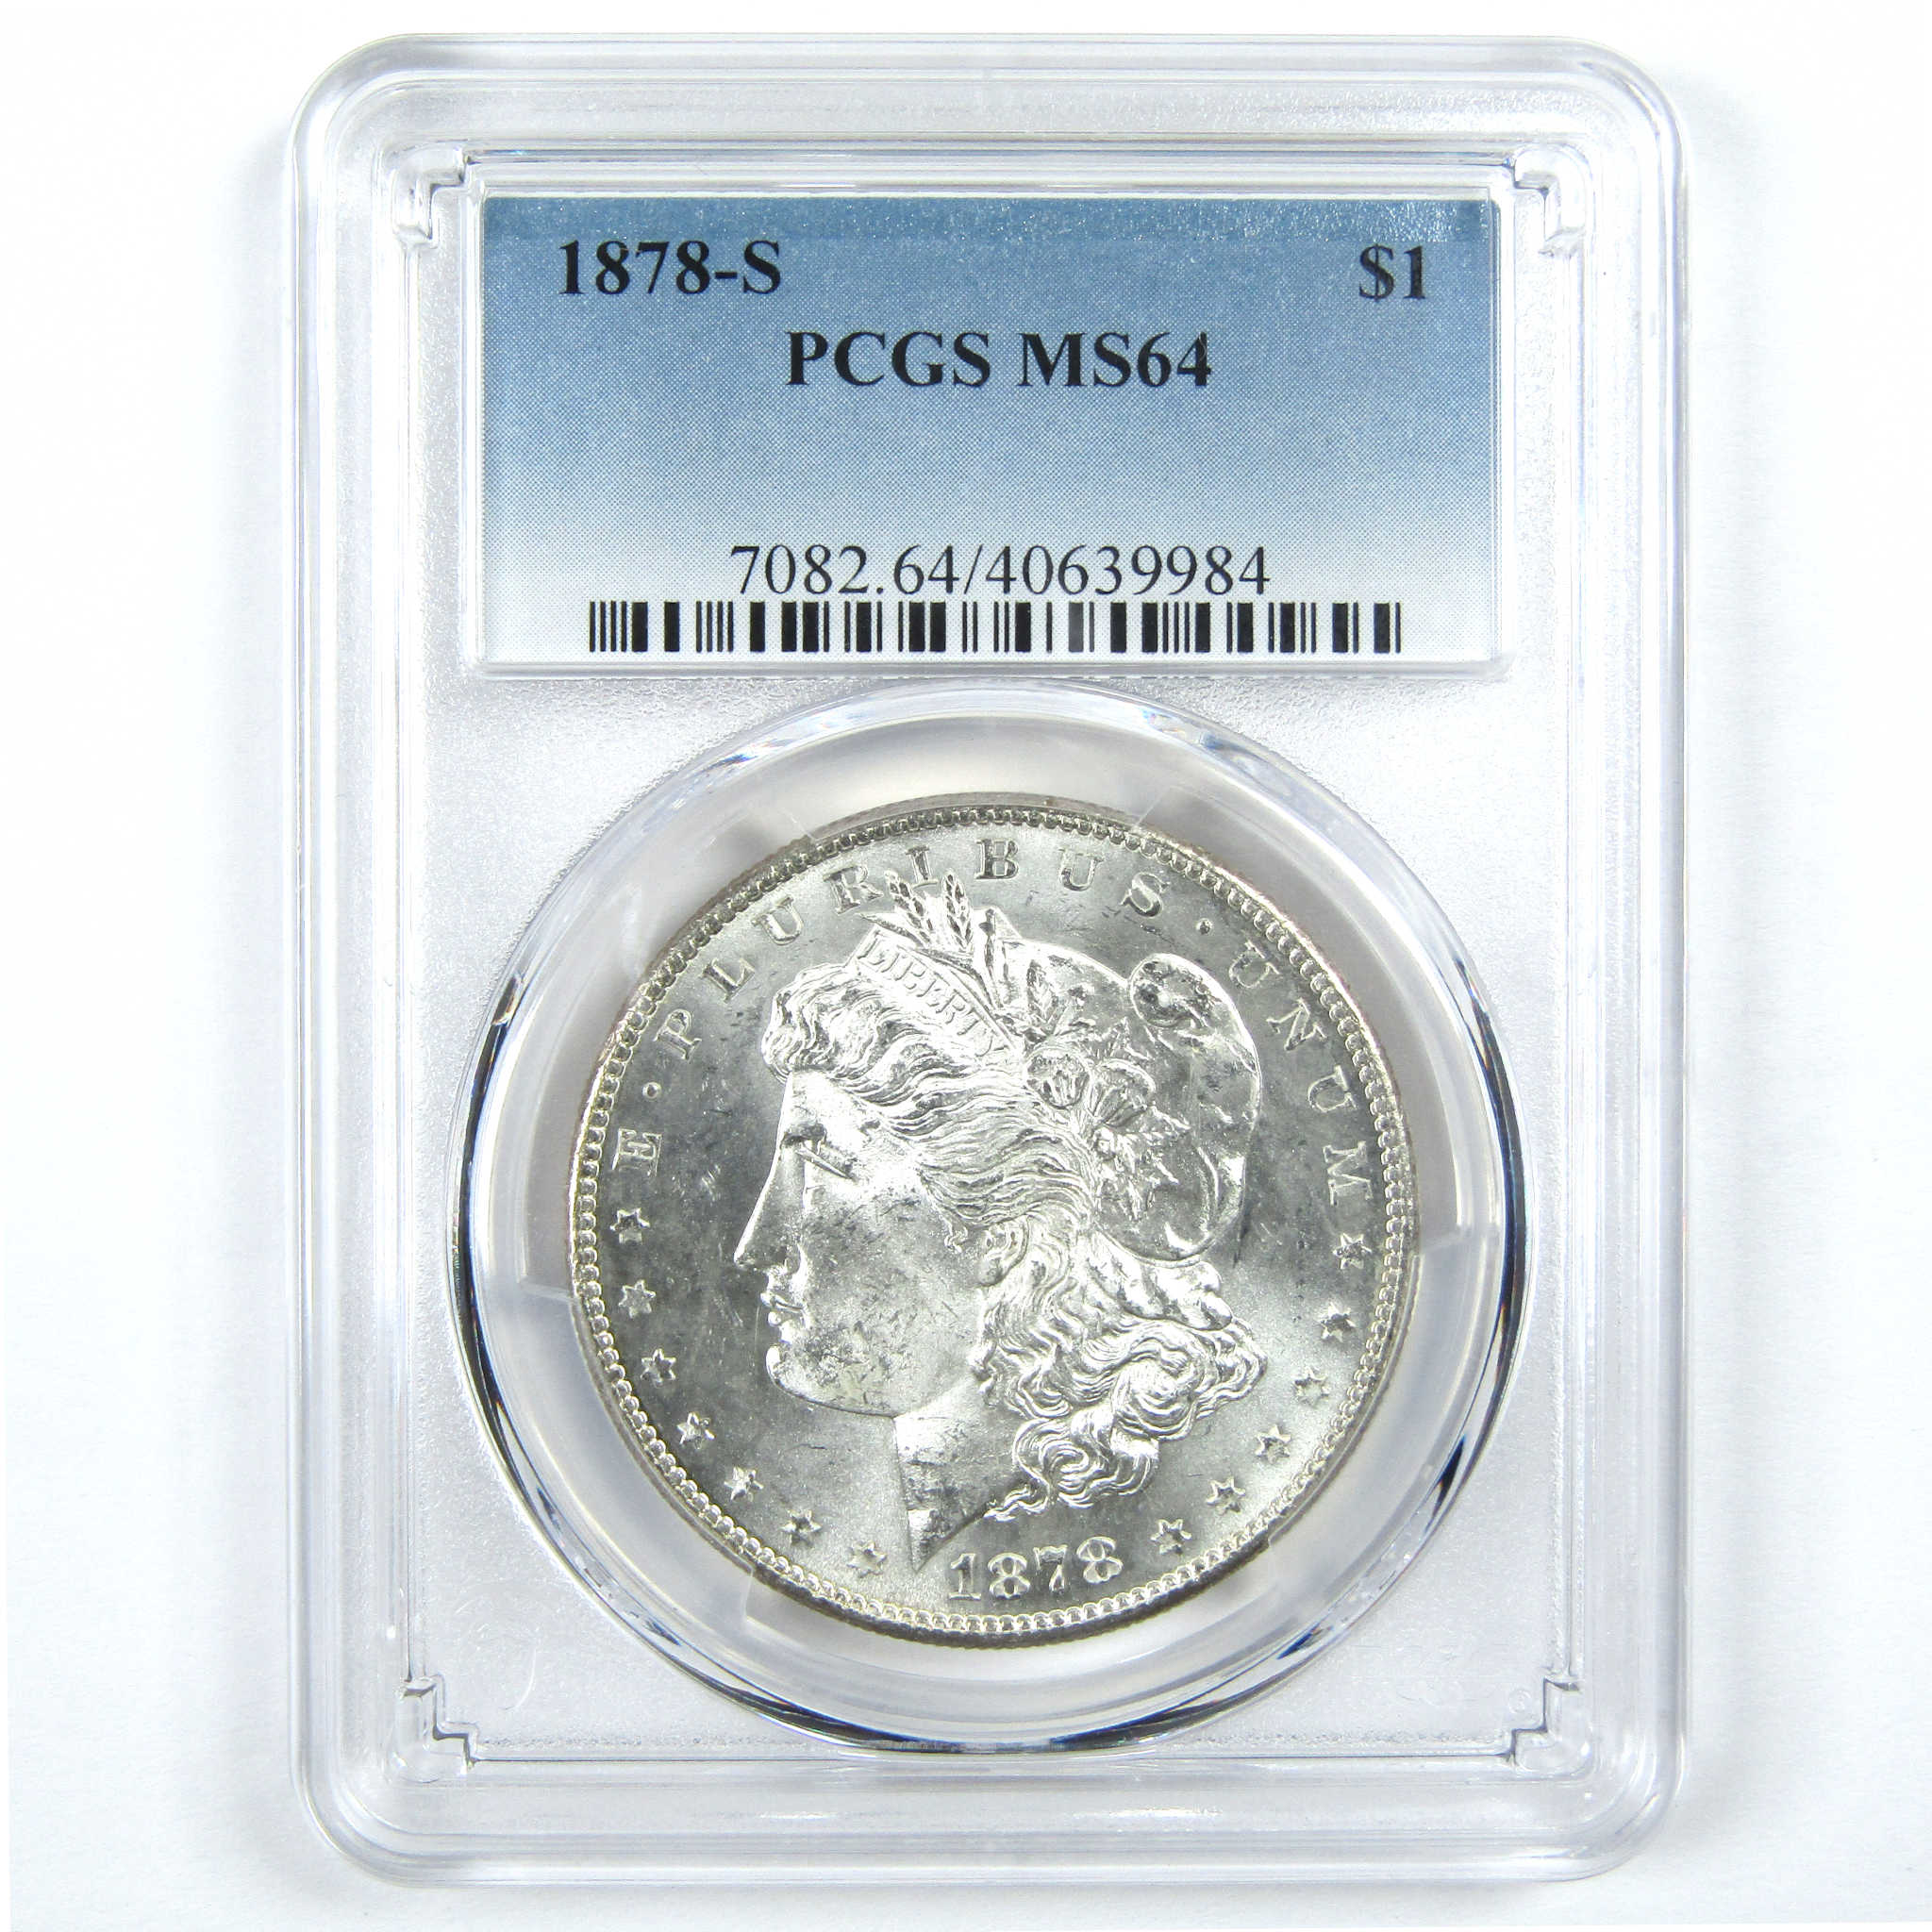 1878 S Morgan Dollar MS 64 PCGS Silver $1 Uncirculated Coin SKU:I13392 - Morgan coin - Morgan silver dollar - Morgan silver dollar for sale - Profile Coins &amp; Collectibles